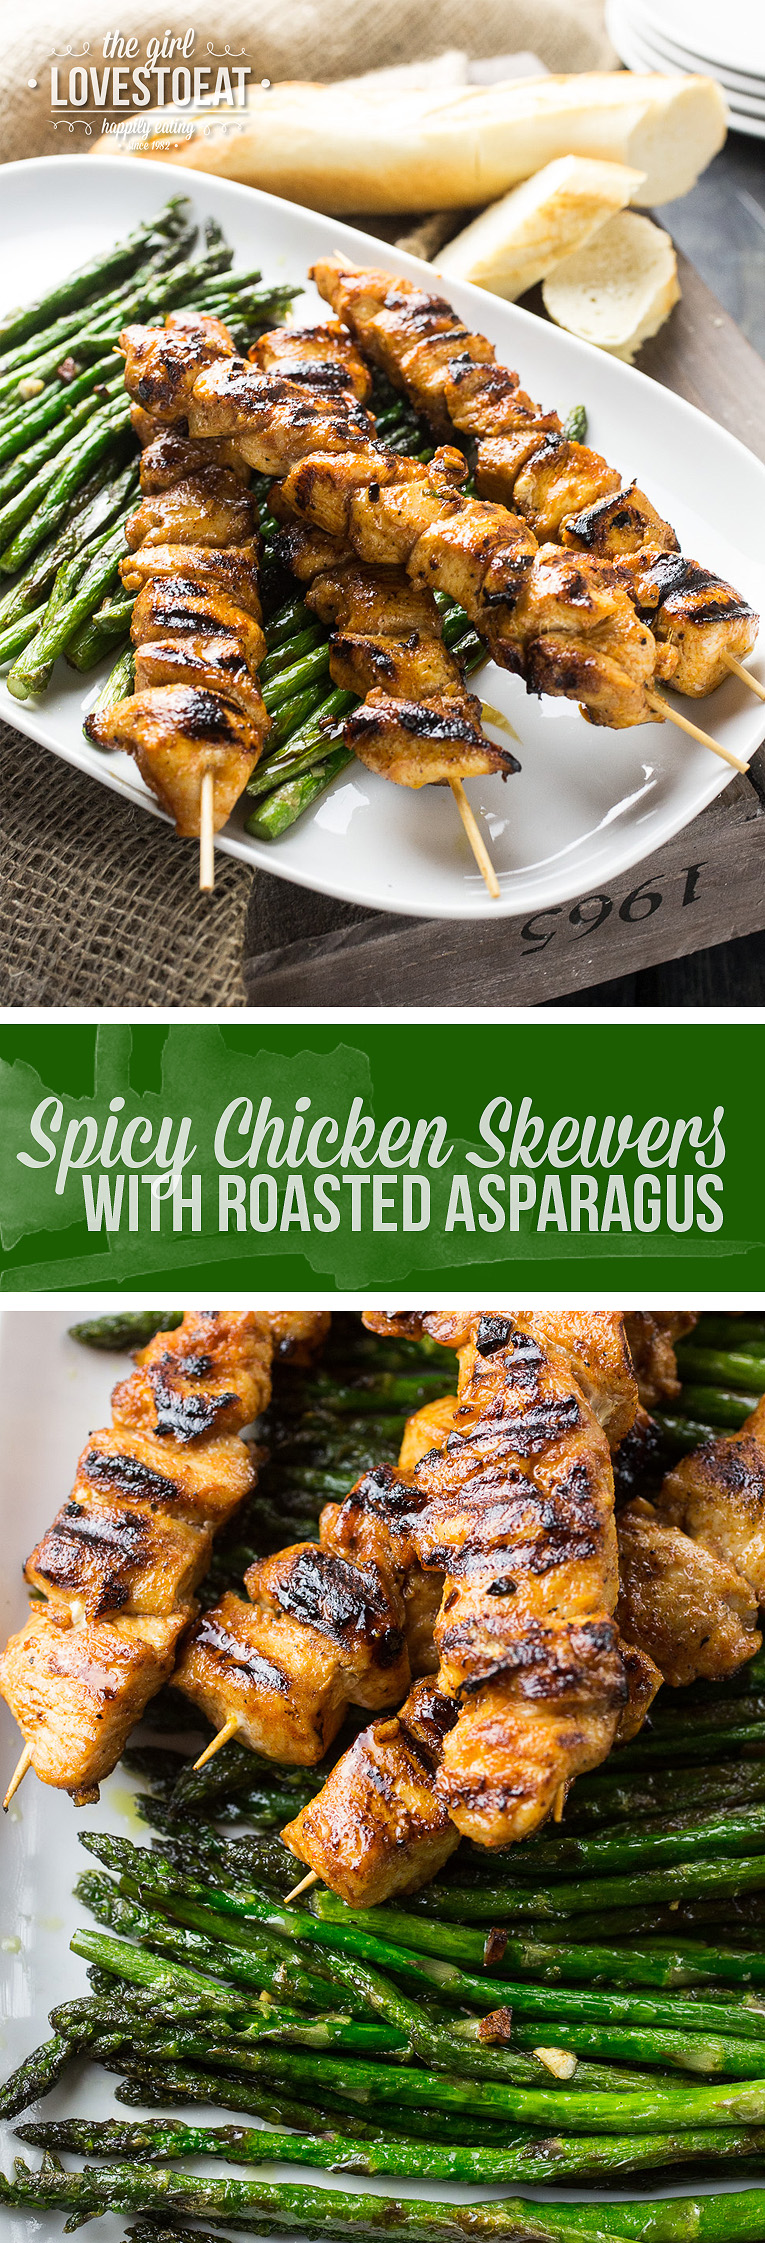 Spicy chicken skewers with roasted asparagus { thegirllovestoeat.com }